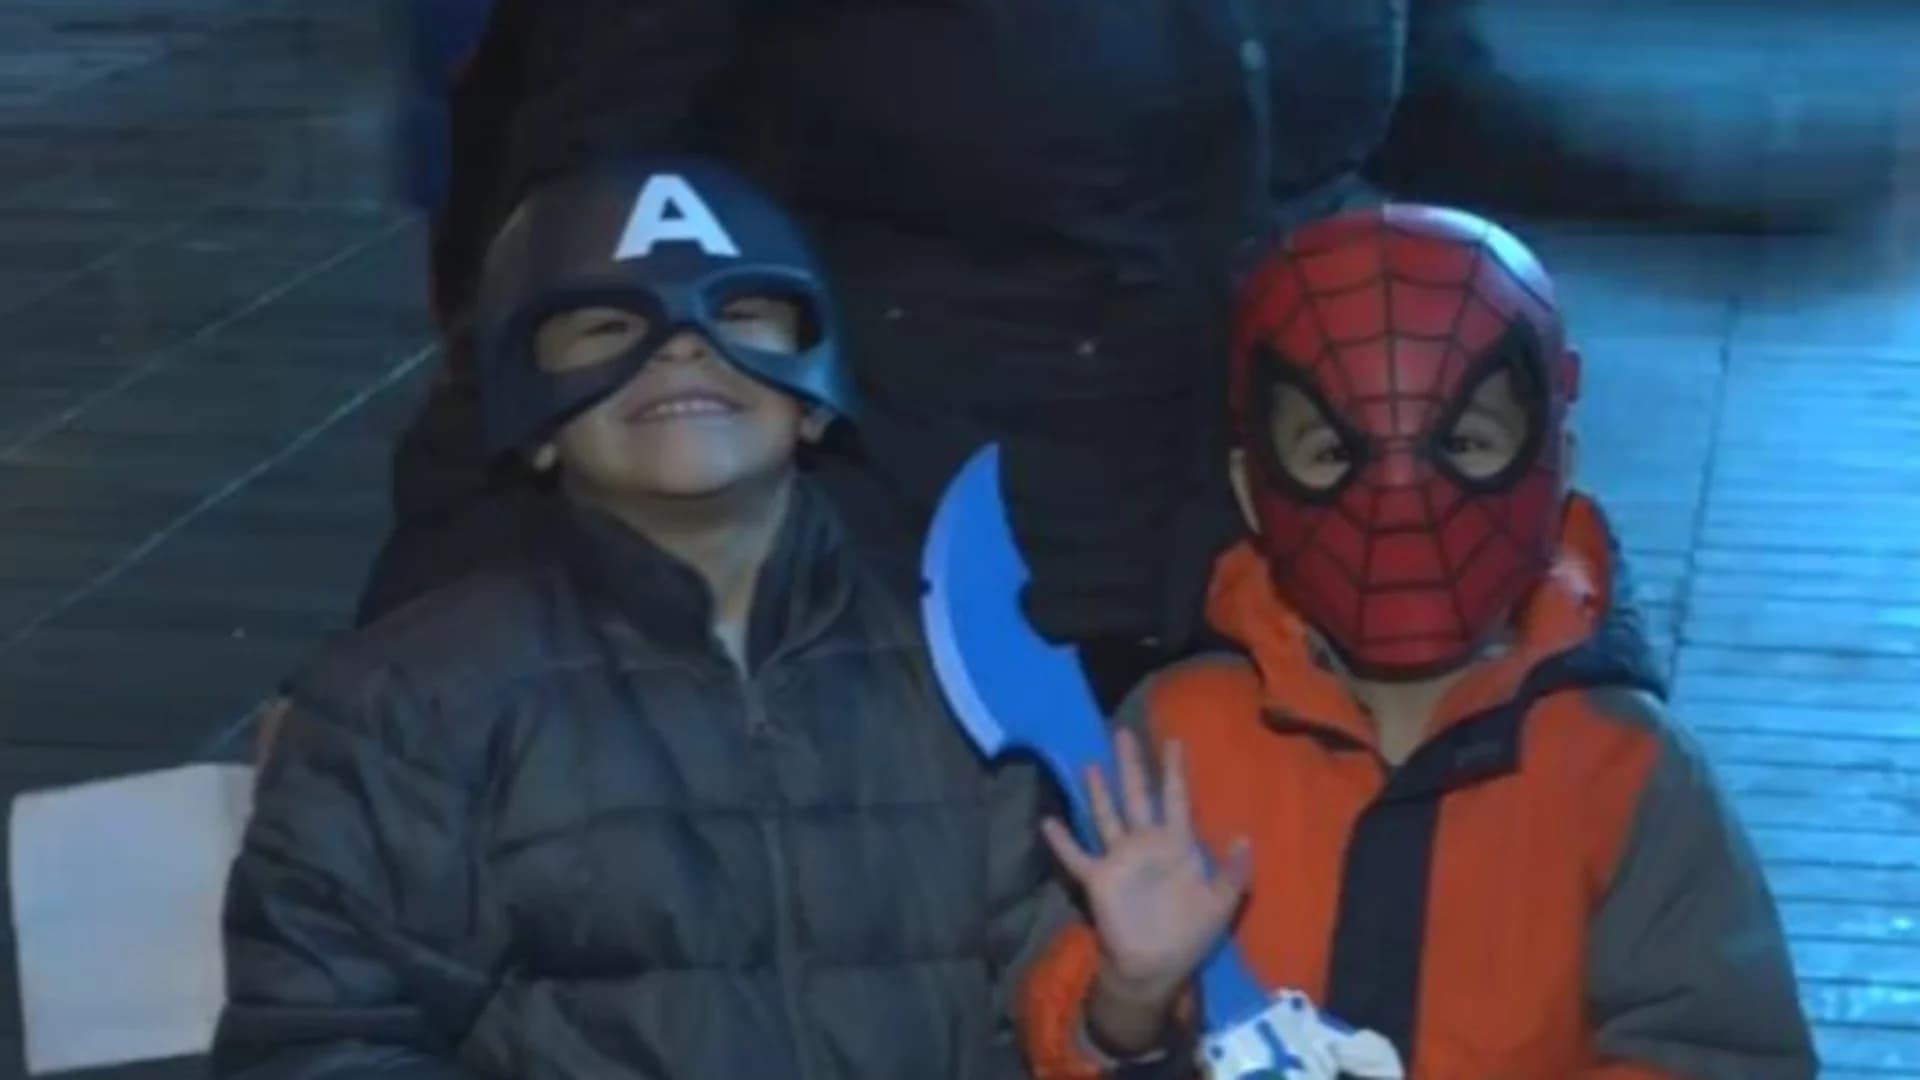 Superheroes come to the Barclays Center this weekend